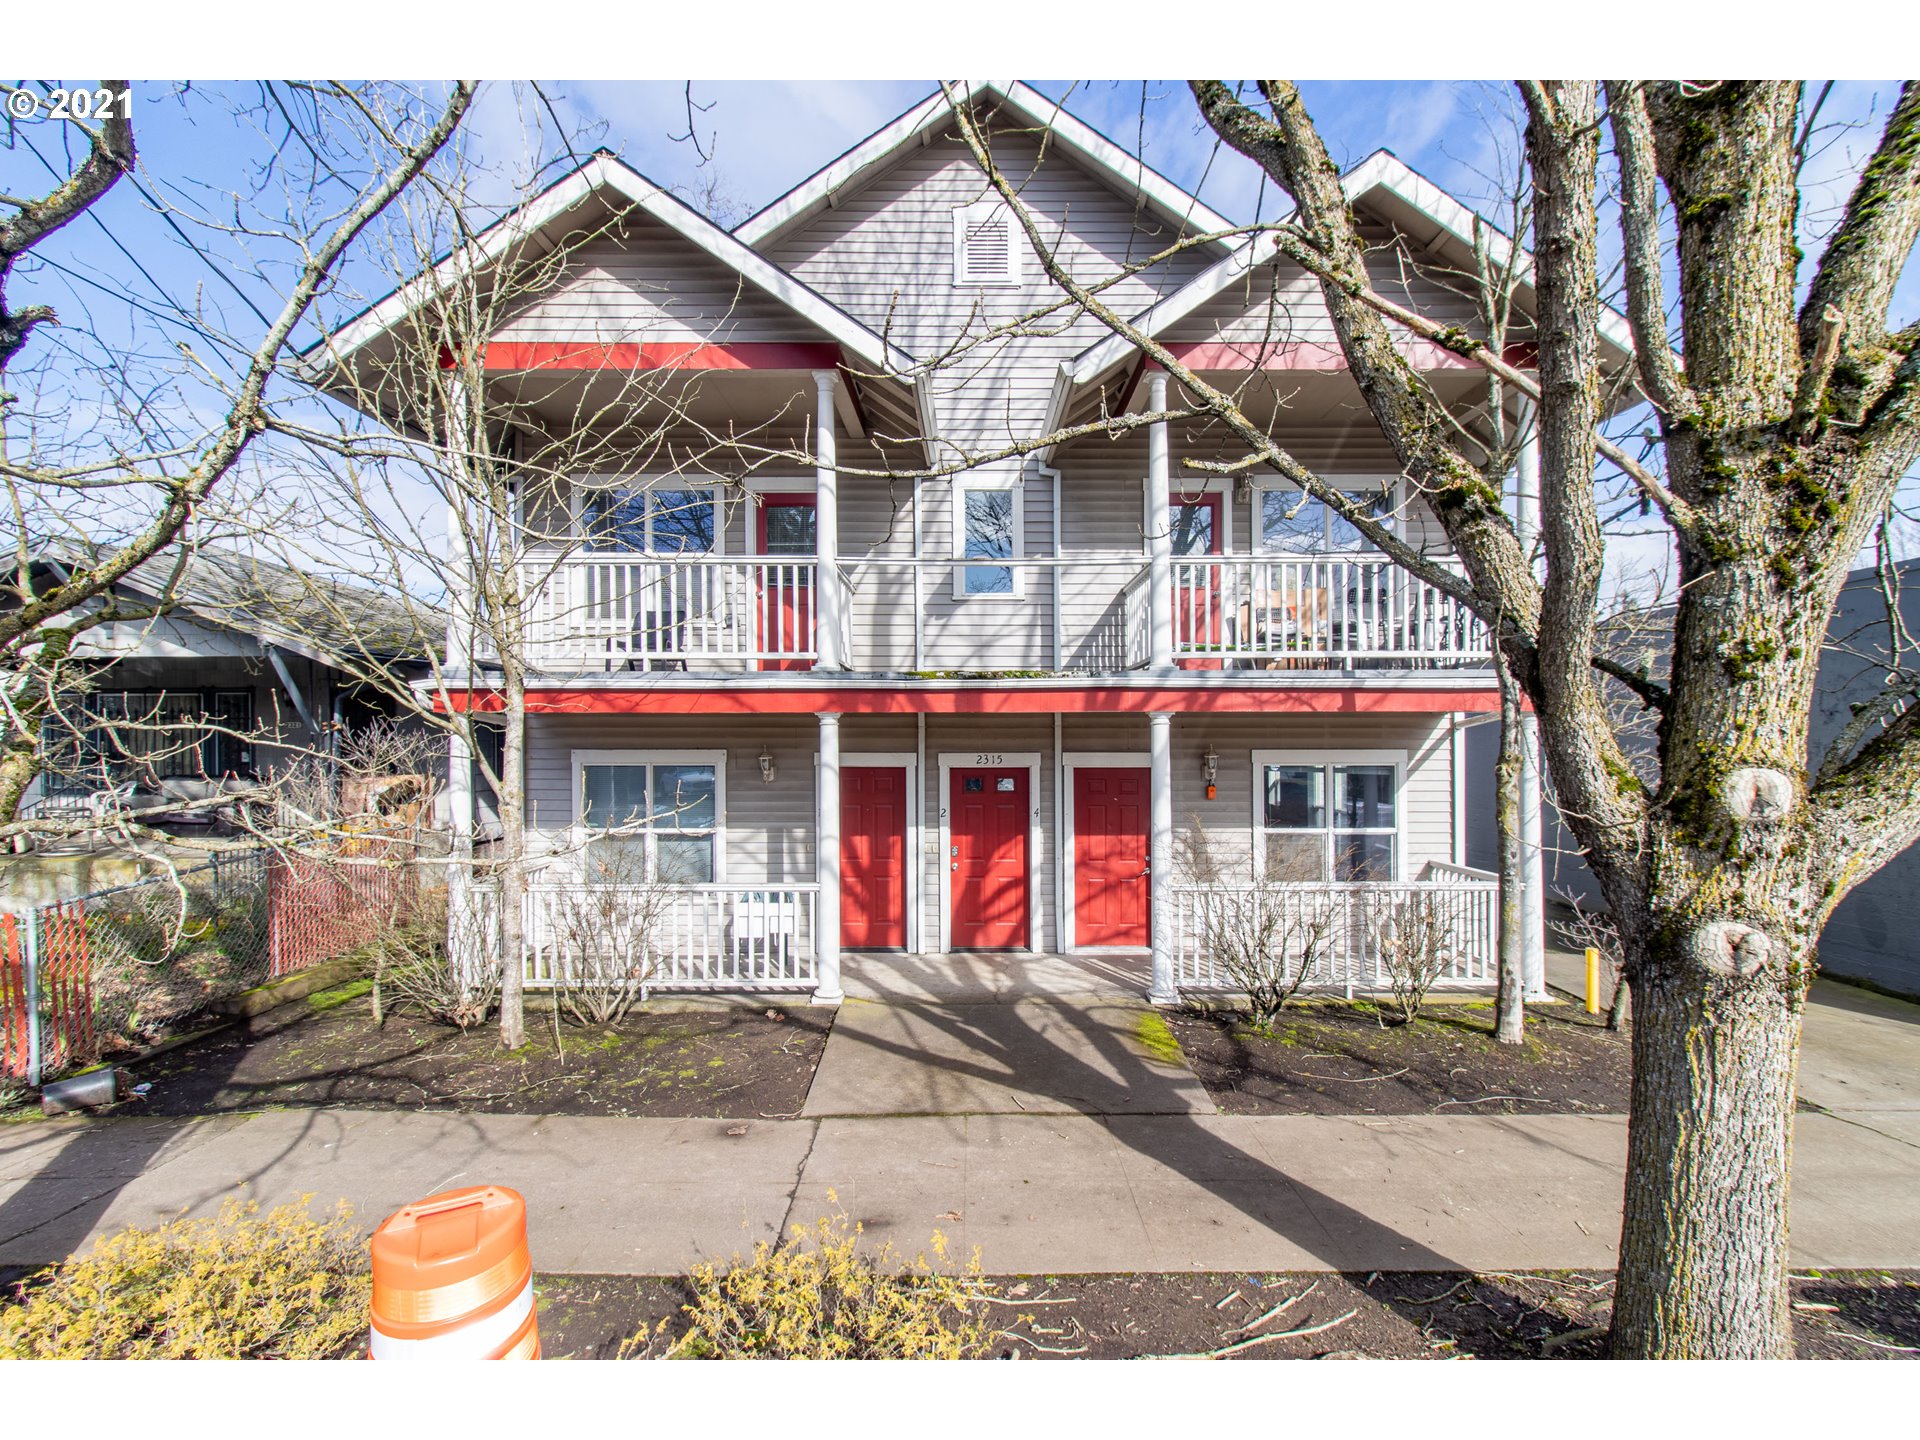 2315 N LOMBARD ST (1 of 17)